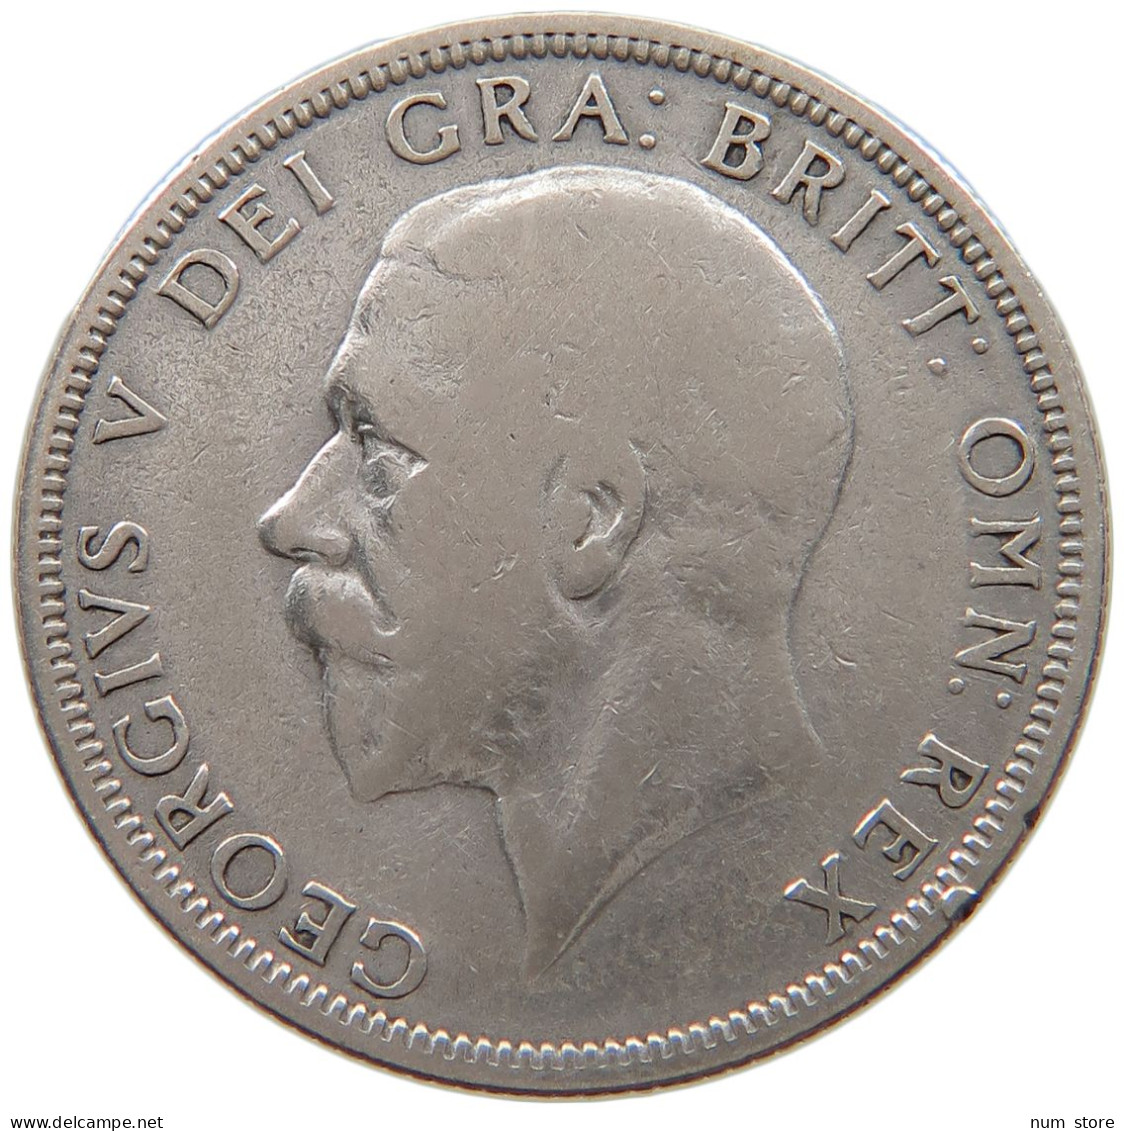 GREAT BRITAIN FLORIN 1935 George V. (1910-1936) #a052 0133 - J. 1 Florin / 2 Schillings